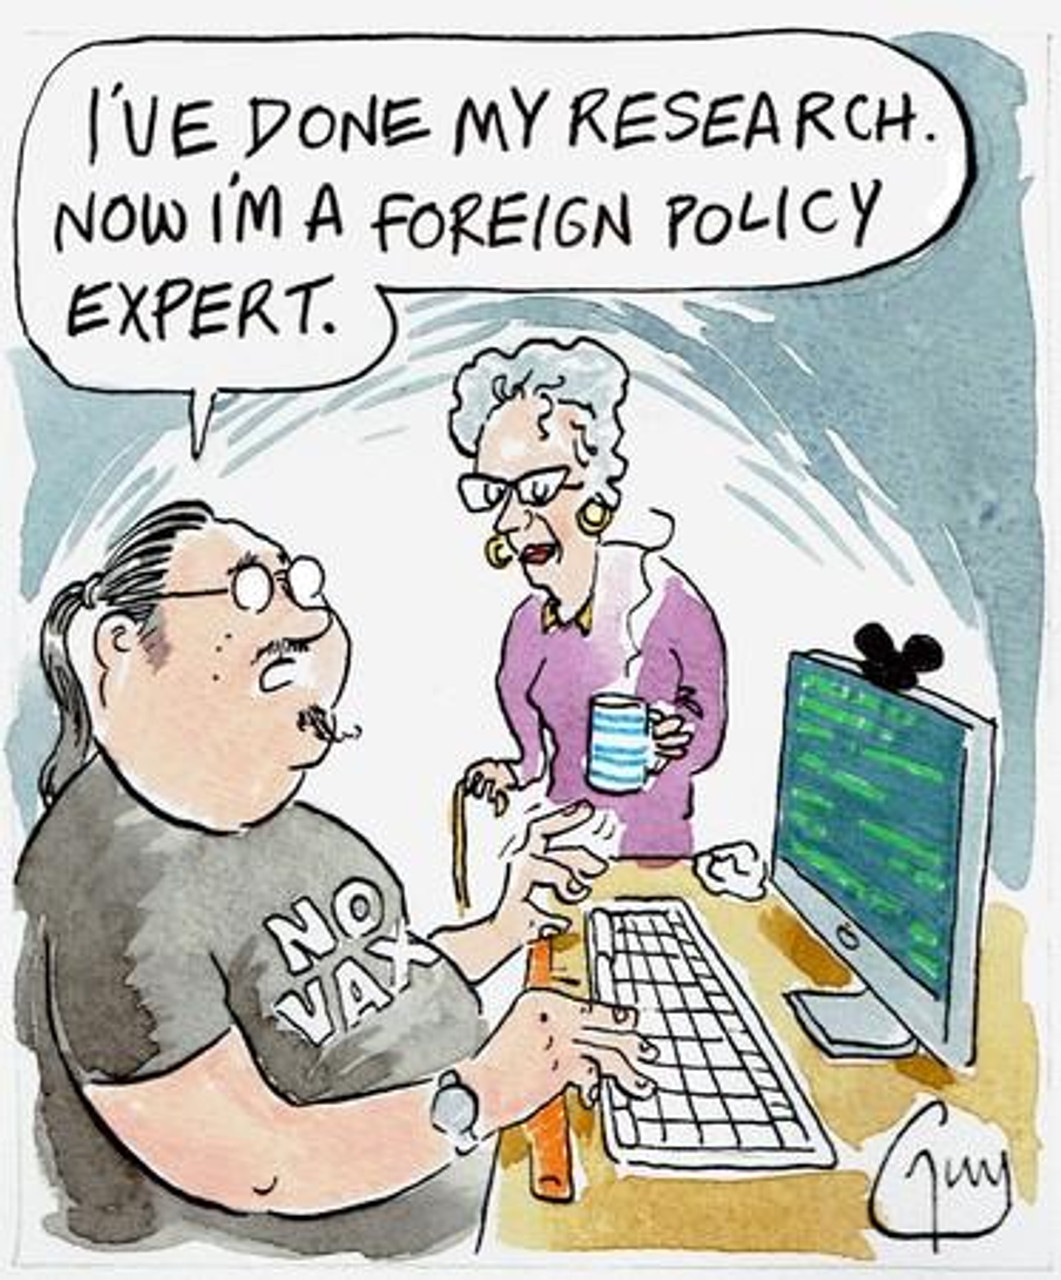 39557879-Guy Venables cartoon Metro - I ve done my research. Now I m a  foreign policy expert. No vax t shirt - Daily Mail | Newsprints